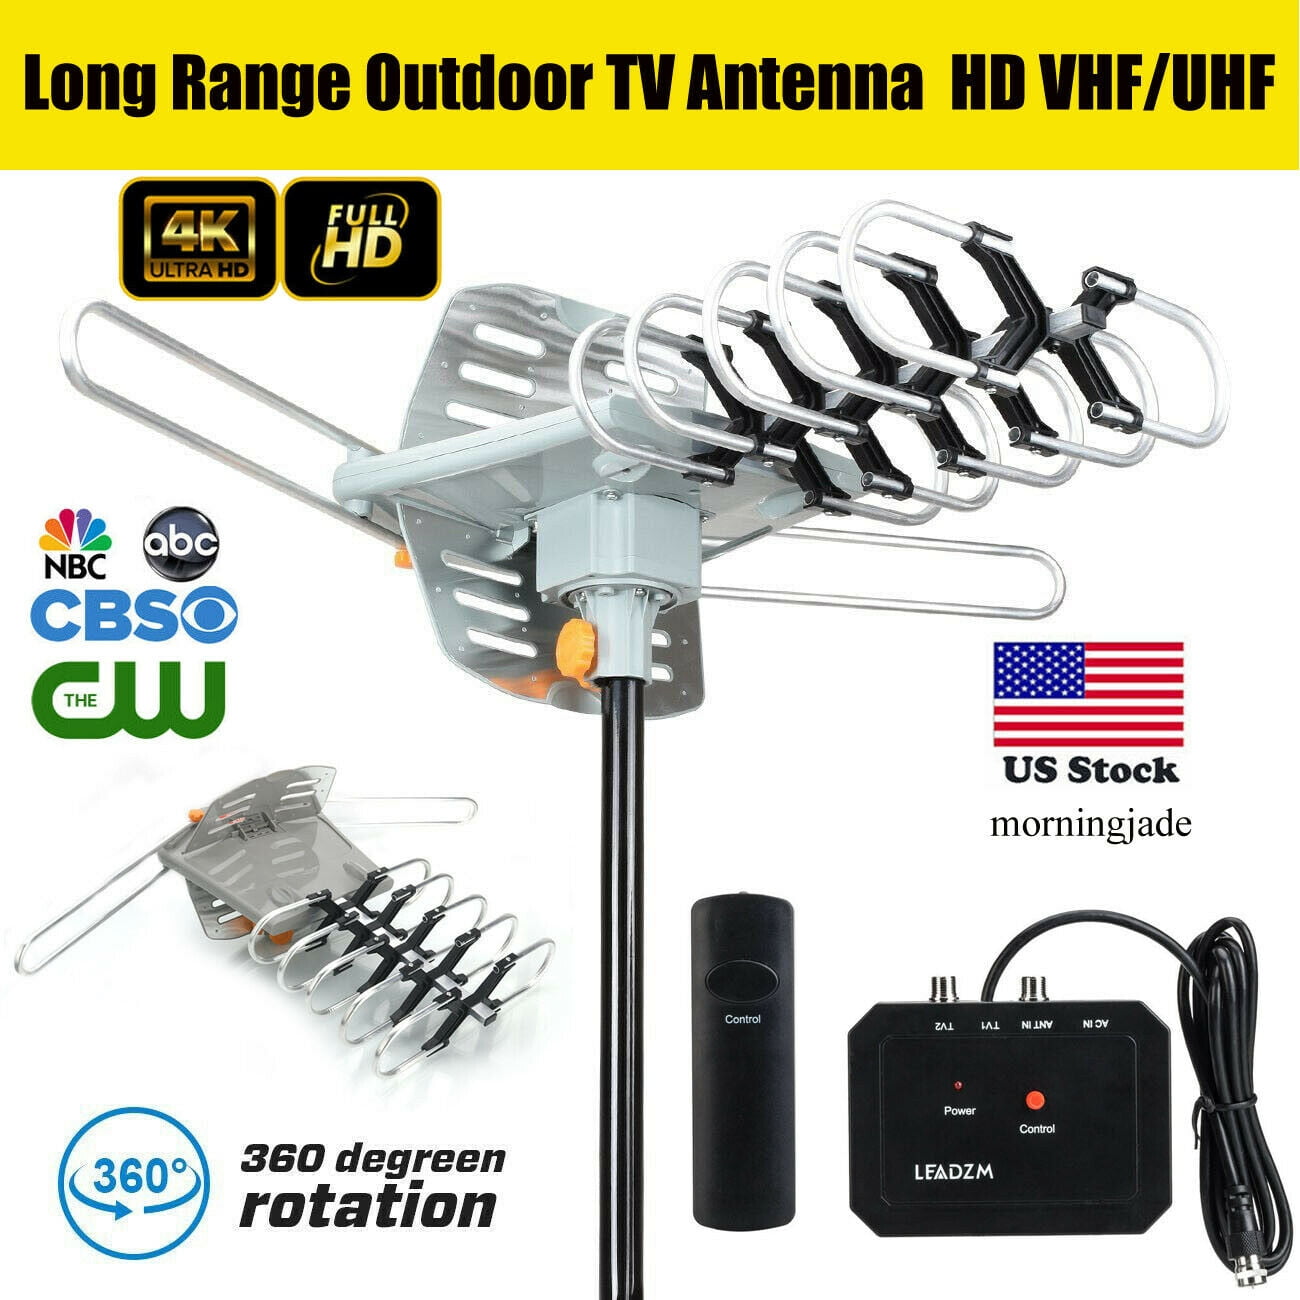 Amplified HD Digital Outdoor HDTV Antenna 150 Miles Long Range with Motorized... 